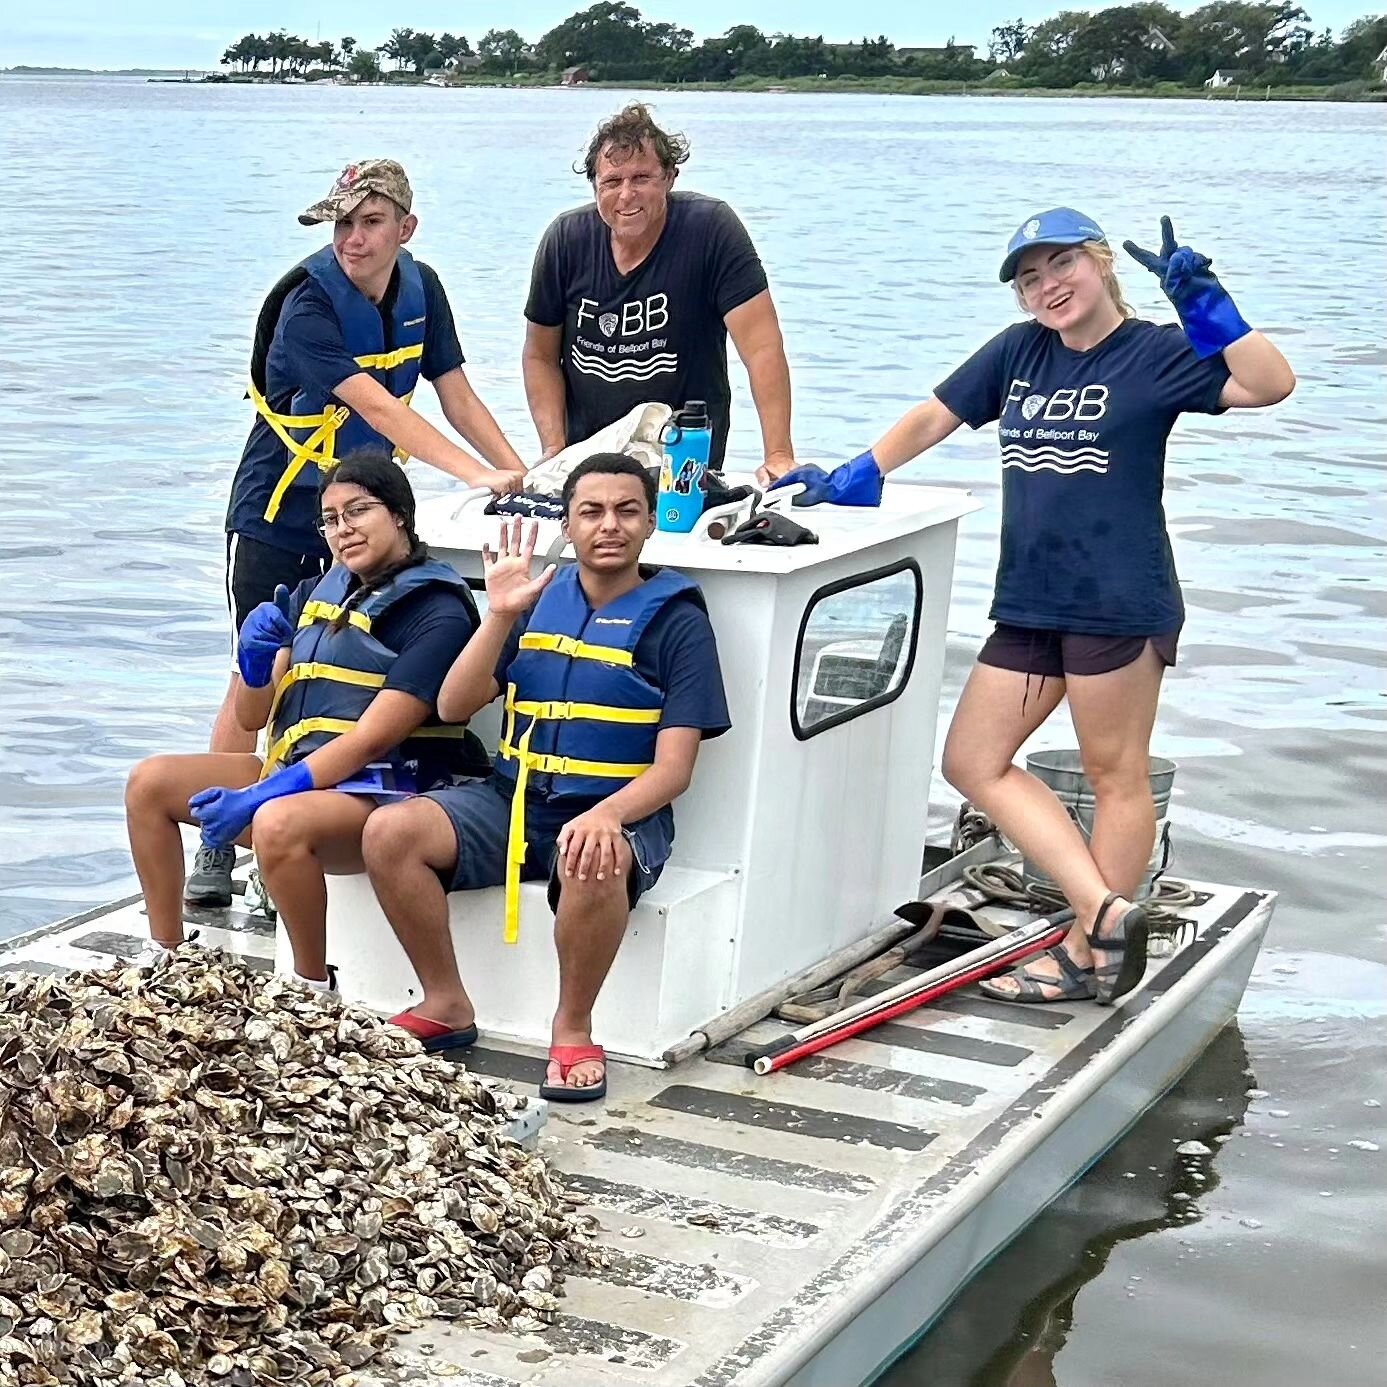 Thank you to the Duffy Foundation, and to CEED, and the Boys &amp; Girls Club of Bellport for a week long collaboration in a marine program with FoBB.

The Restoration Team of teen members identified and recorded marine species in Bellport Bay, seine